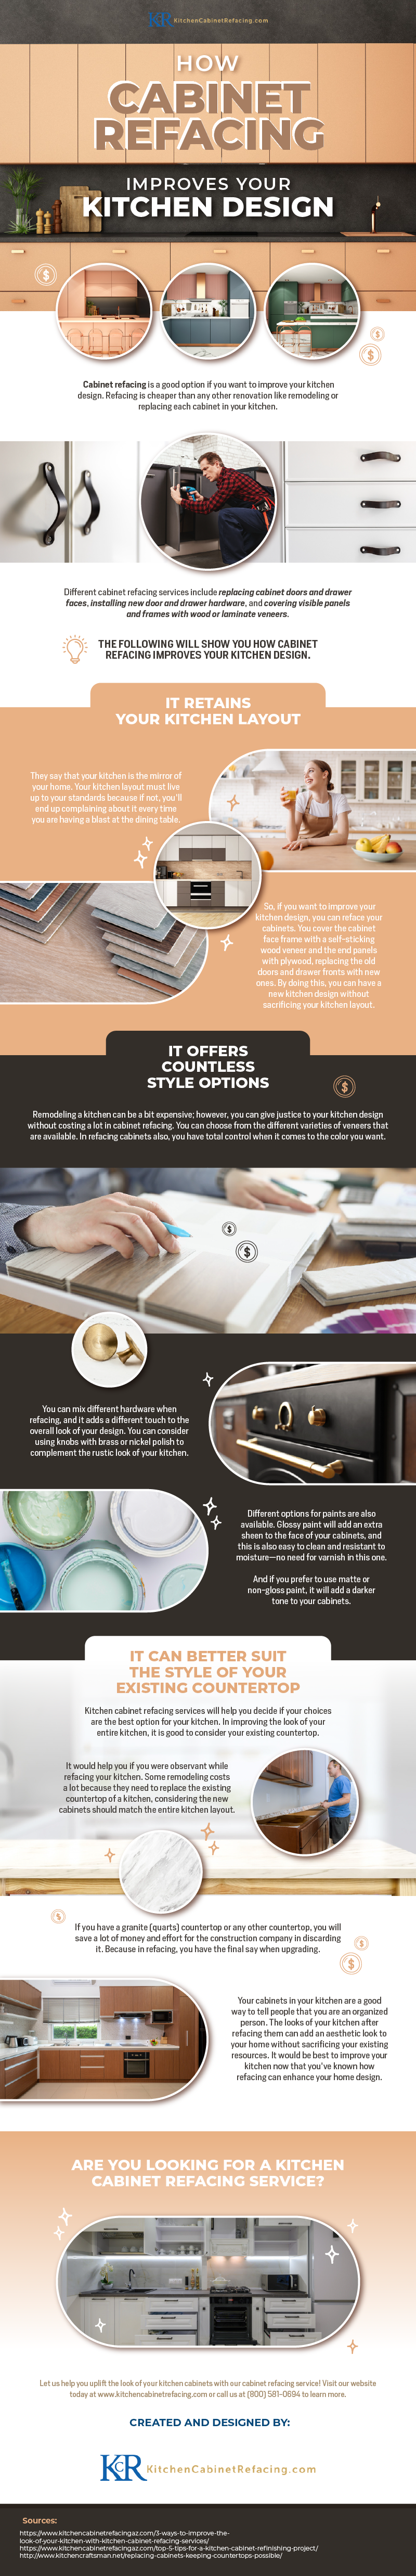 How_Cabinet_Refacing_Improves_your_Kitchen_Design_infographic